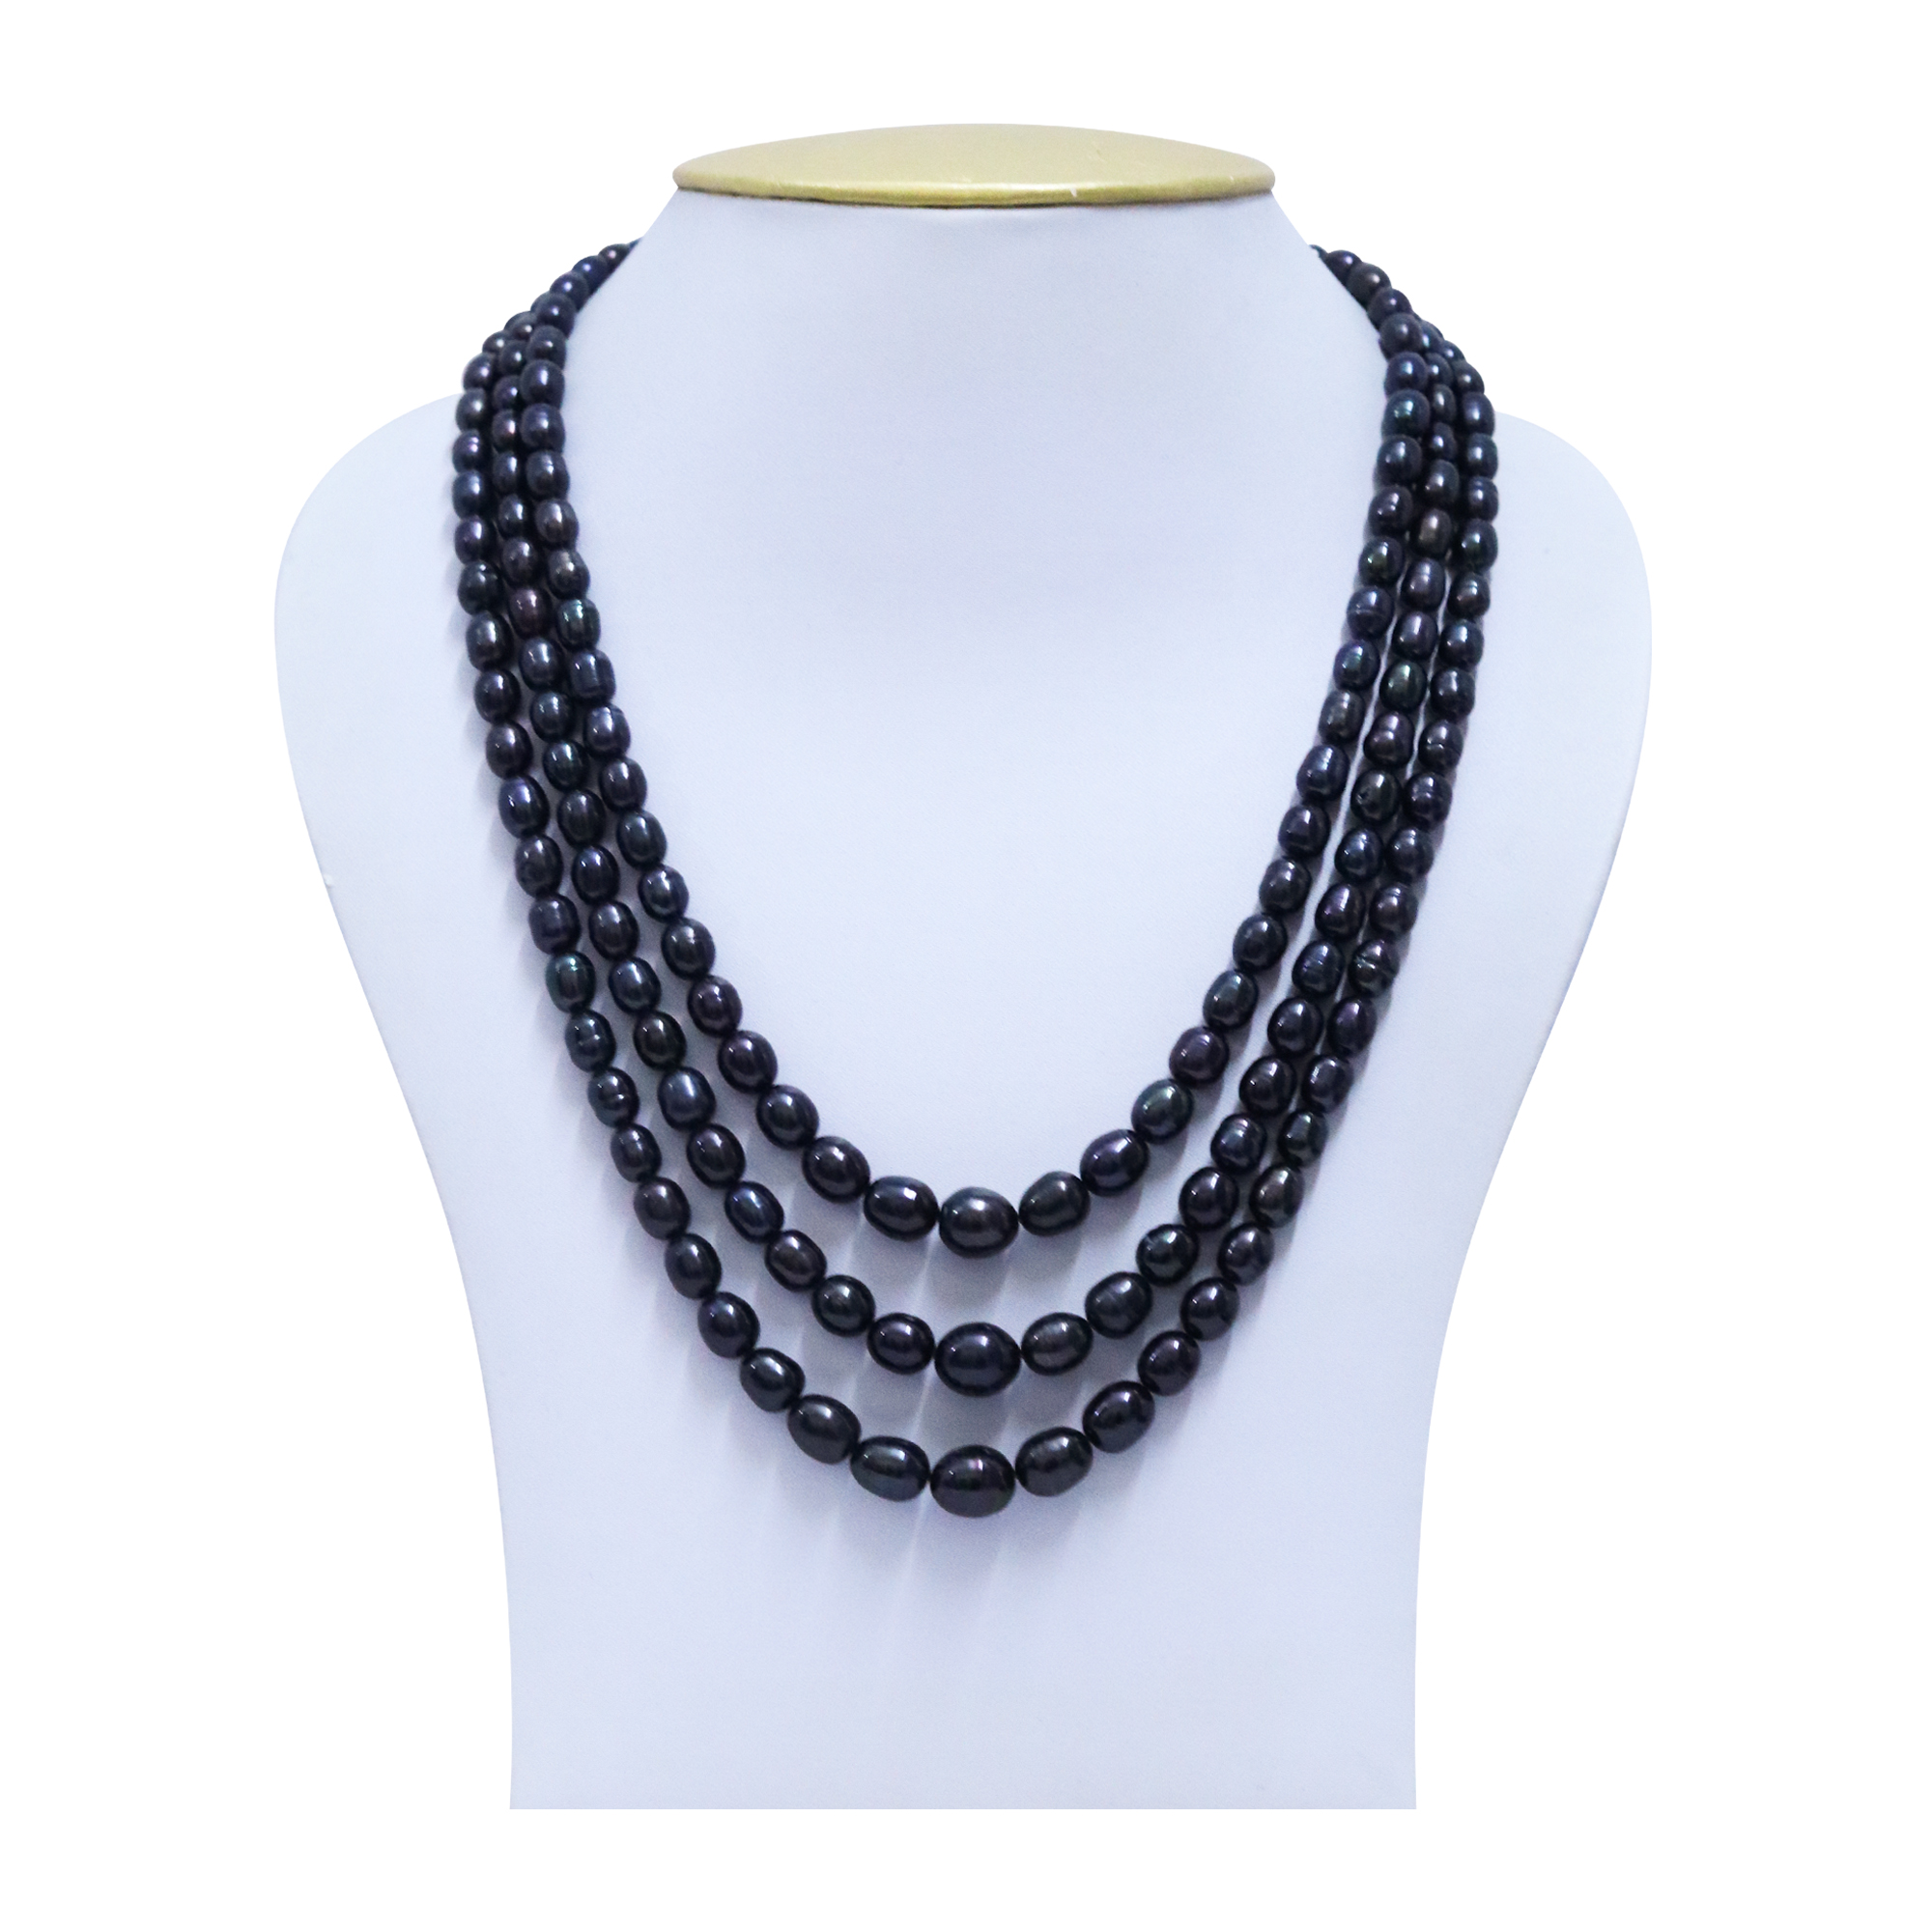 Buy 8mm Black Pearl Necklace for Women Fashion Round Pearl Jewelry Gifts  for Women 16,18,20 inches, 20 inch, bead, bead at Amazon.in